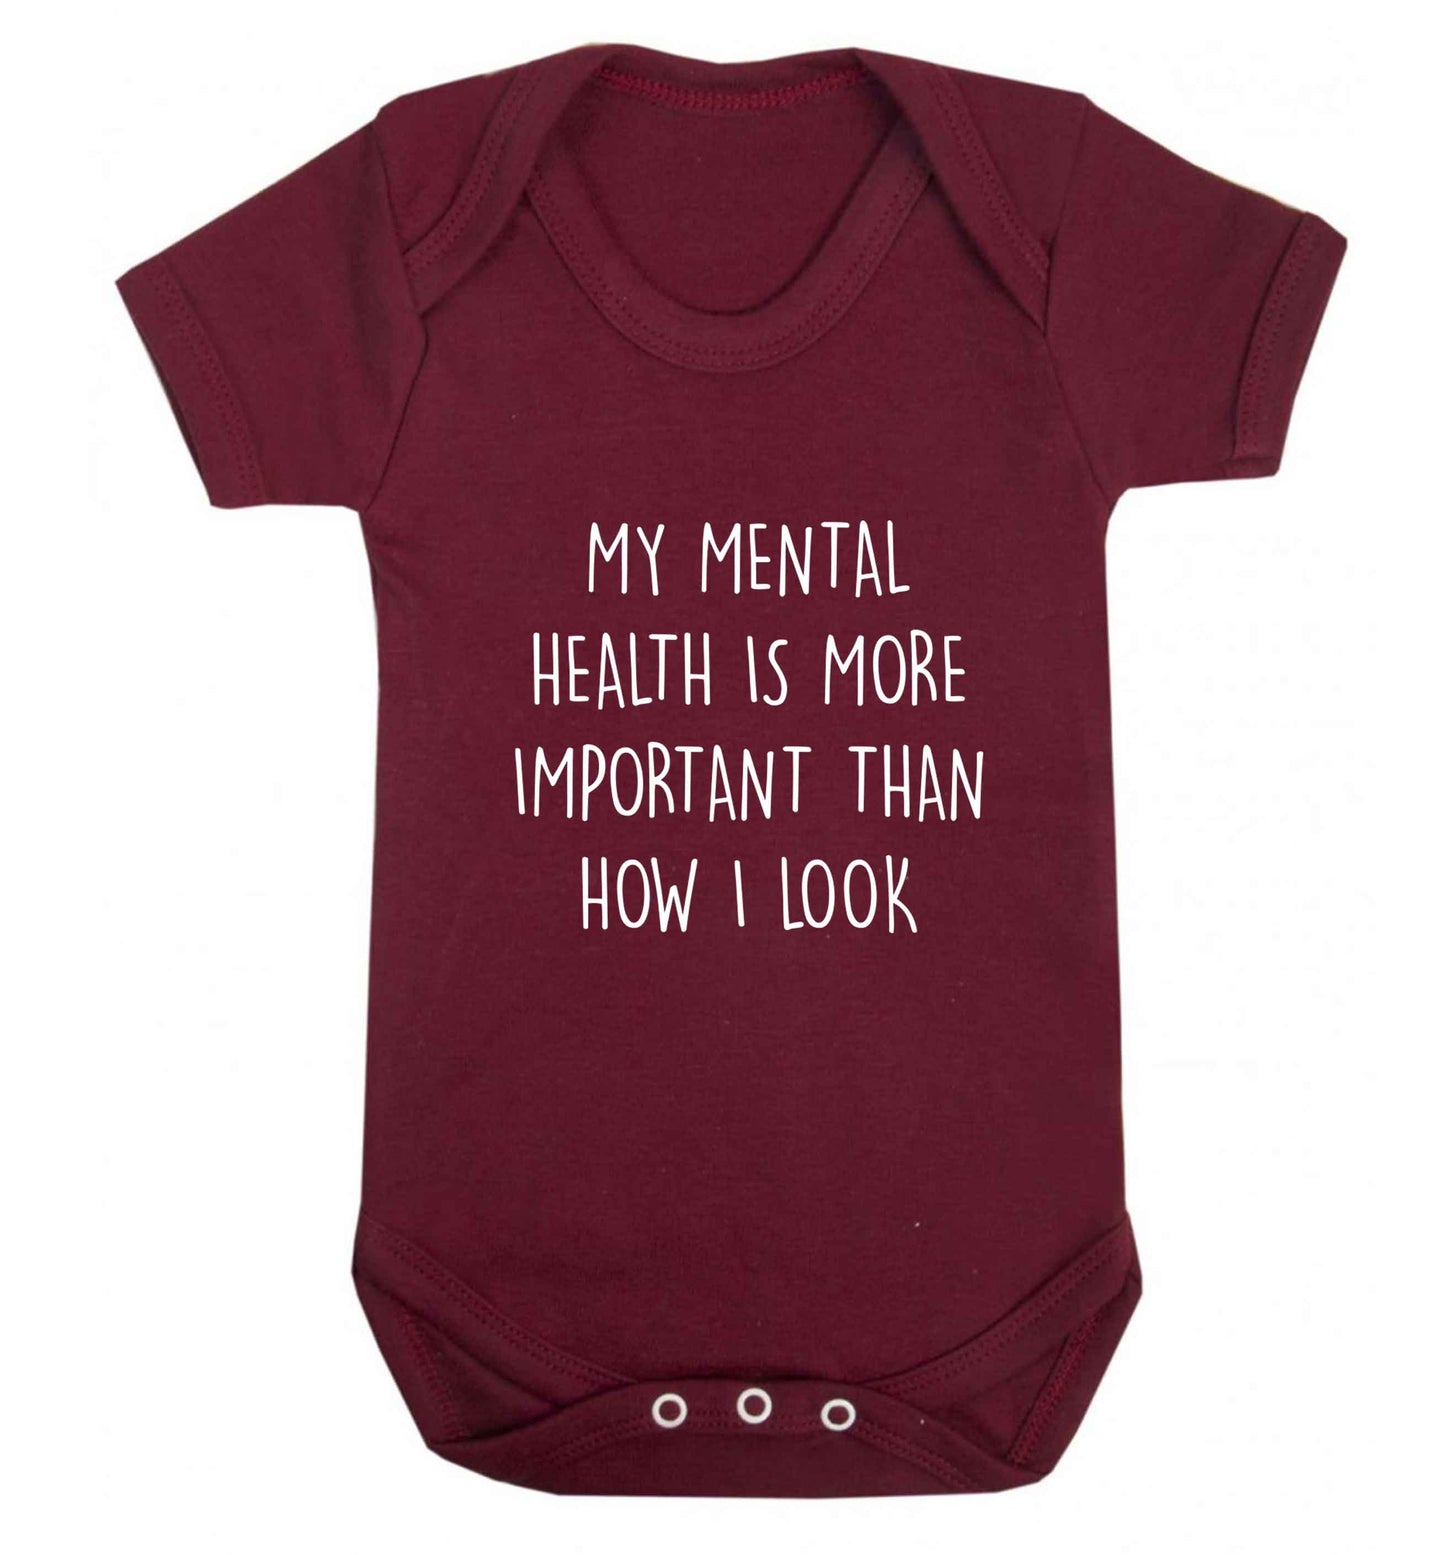 My mental health is more importnat than how I look baby vest maroon 18-24 months